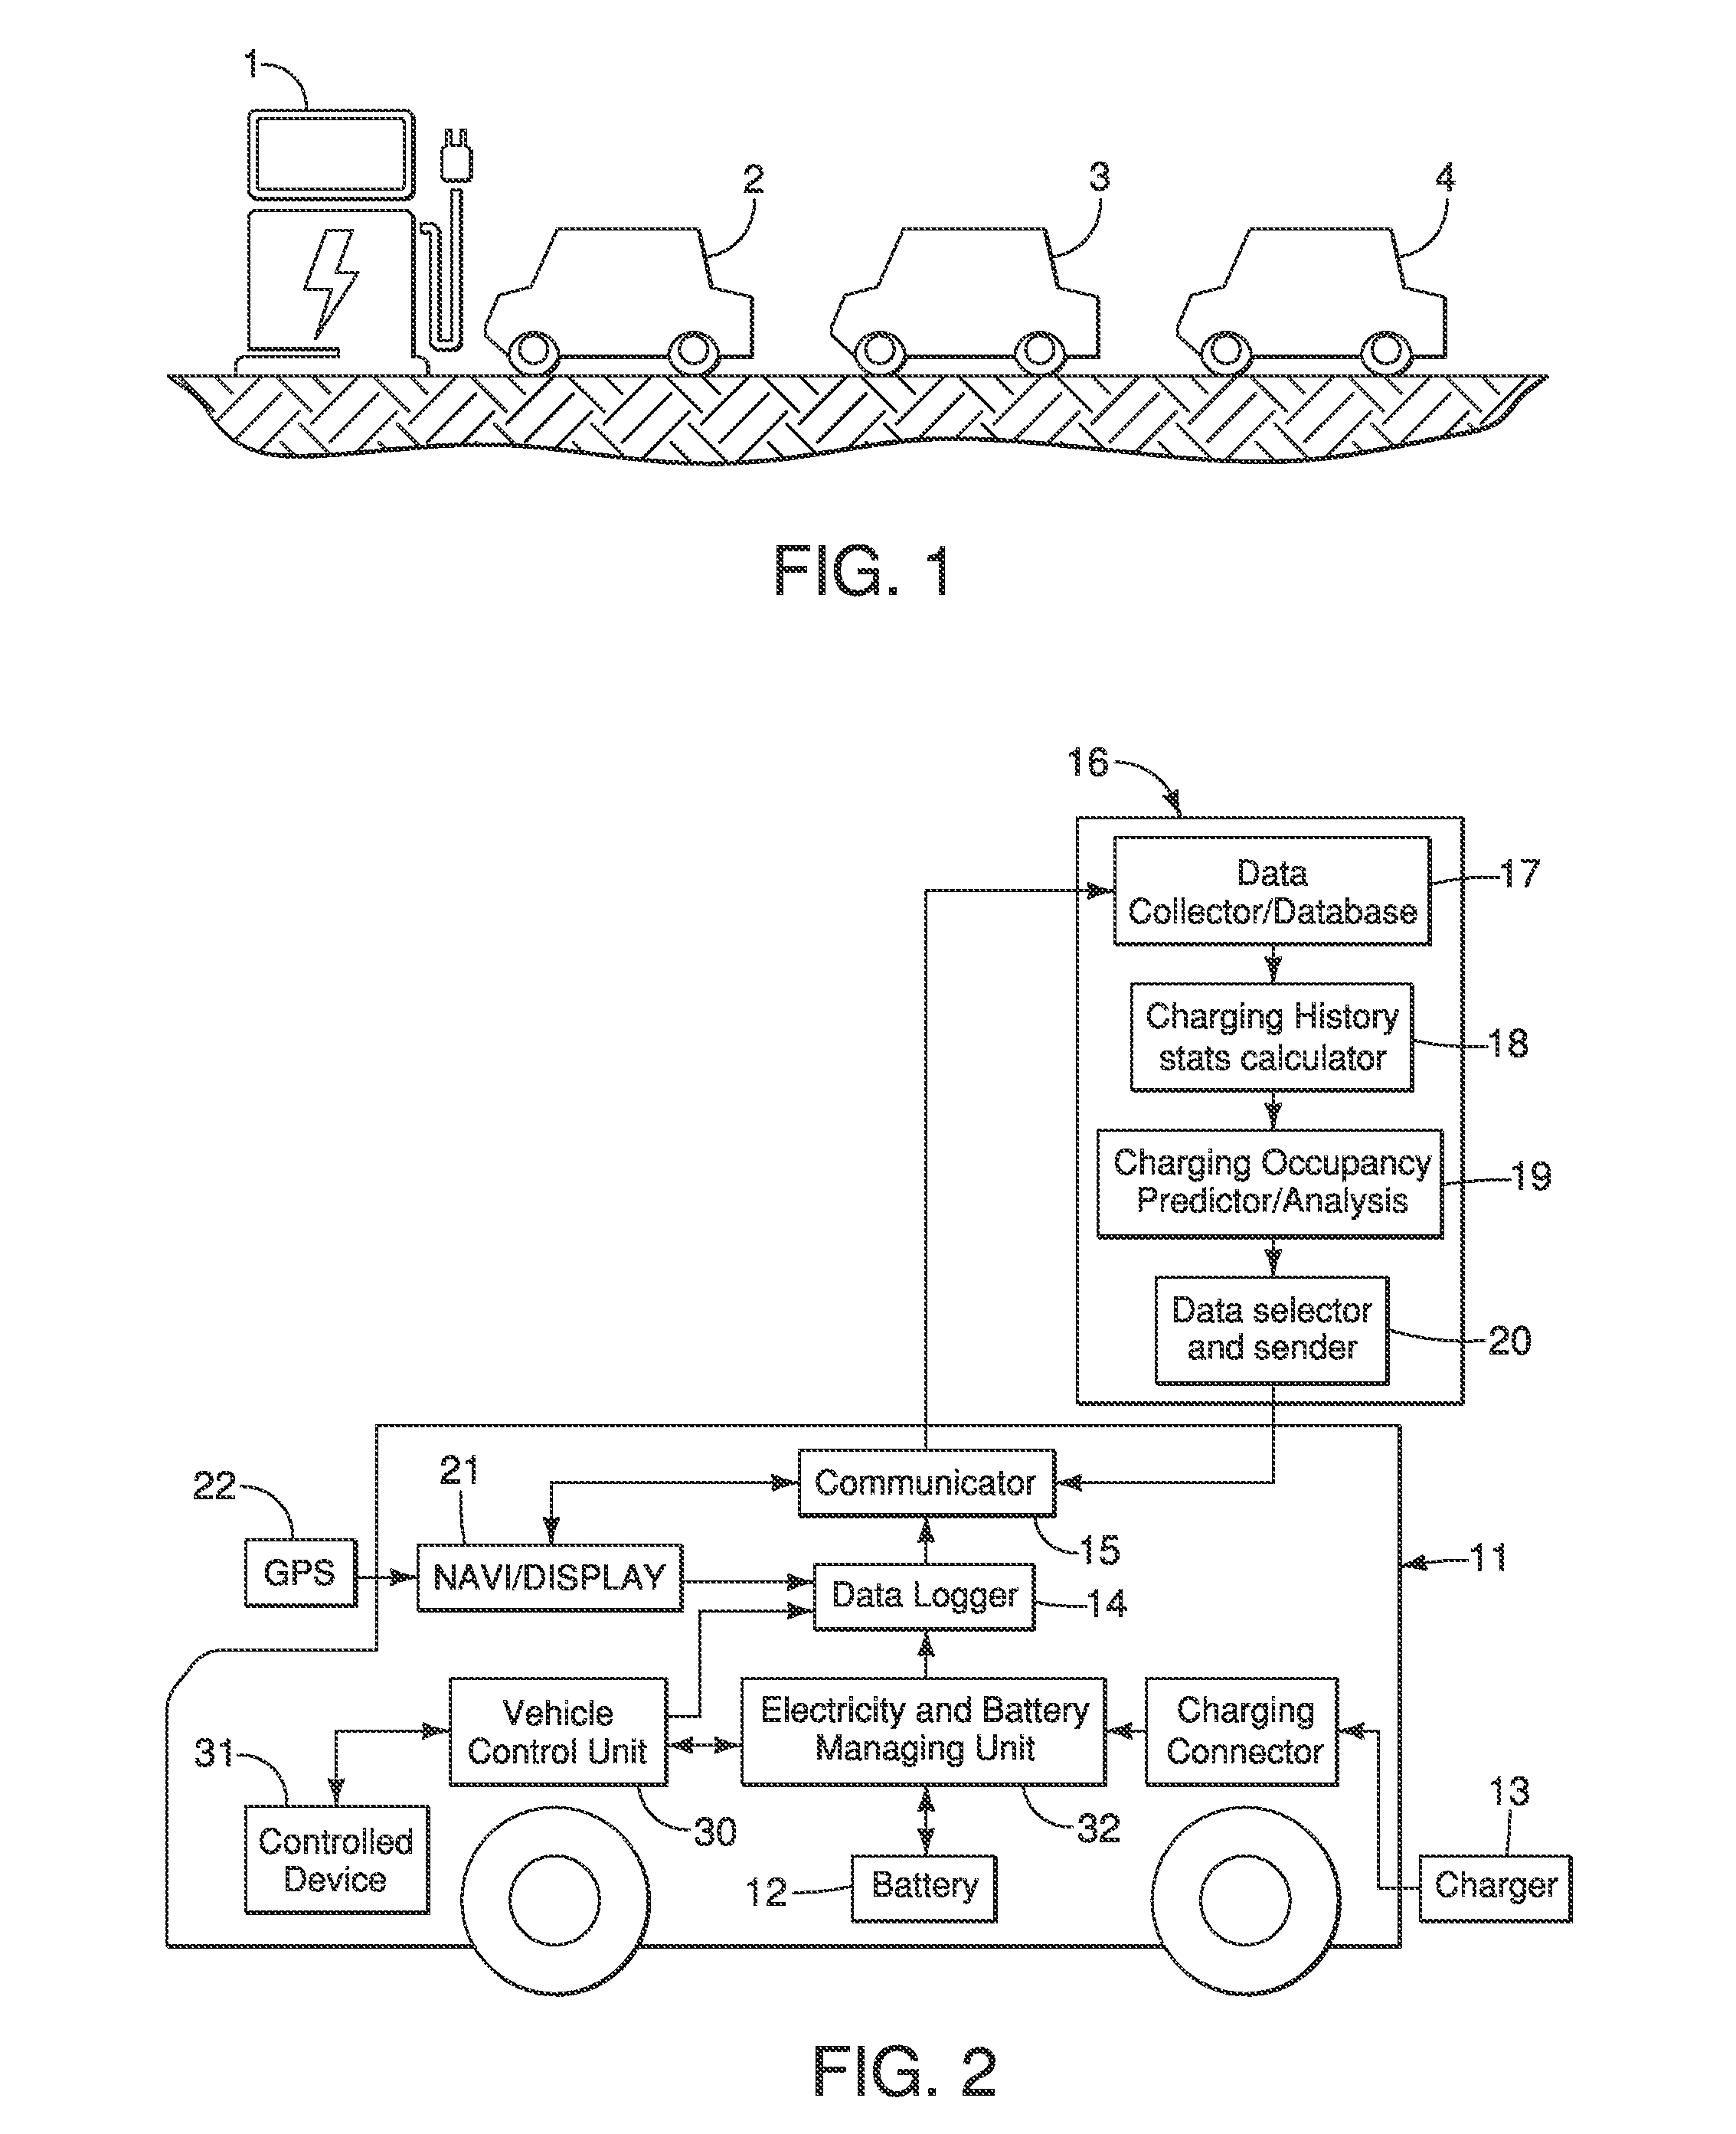 System and method of predicting usage of a charging station